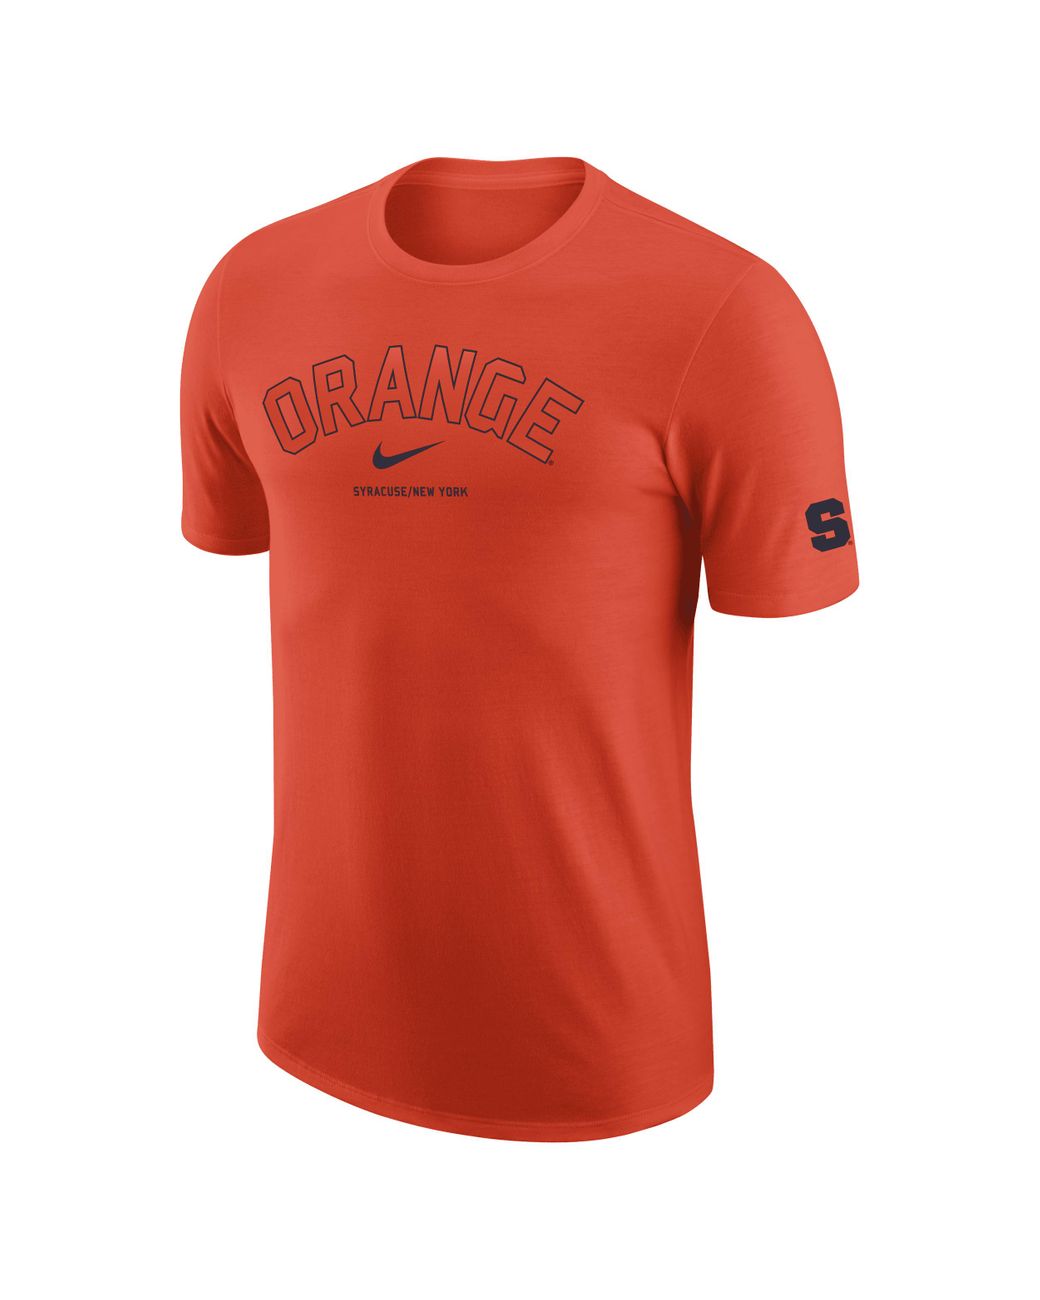 Nike College Dri-fit (syracuse) T-shirt In Orange, in Red for Men | Lyst